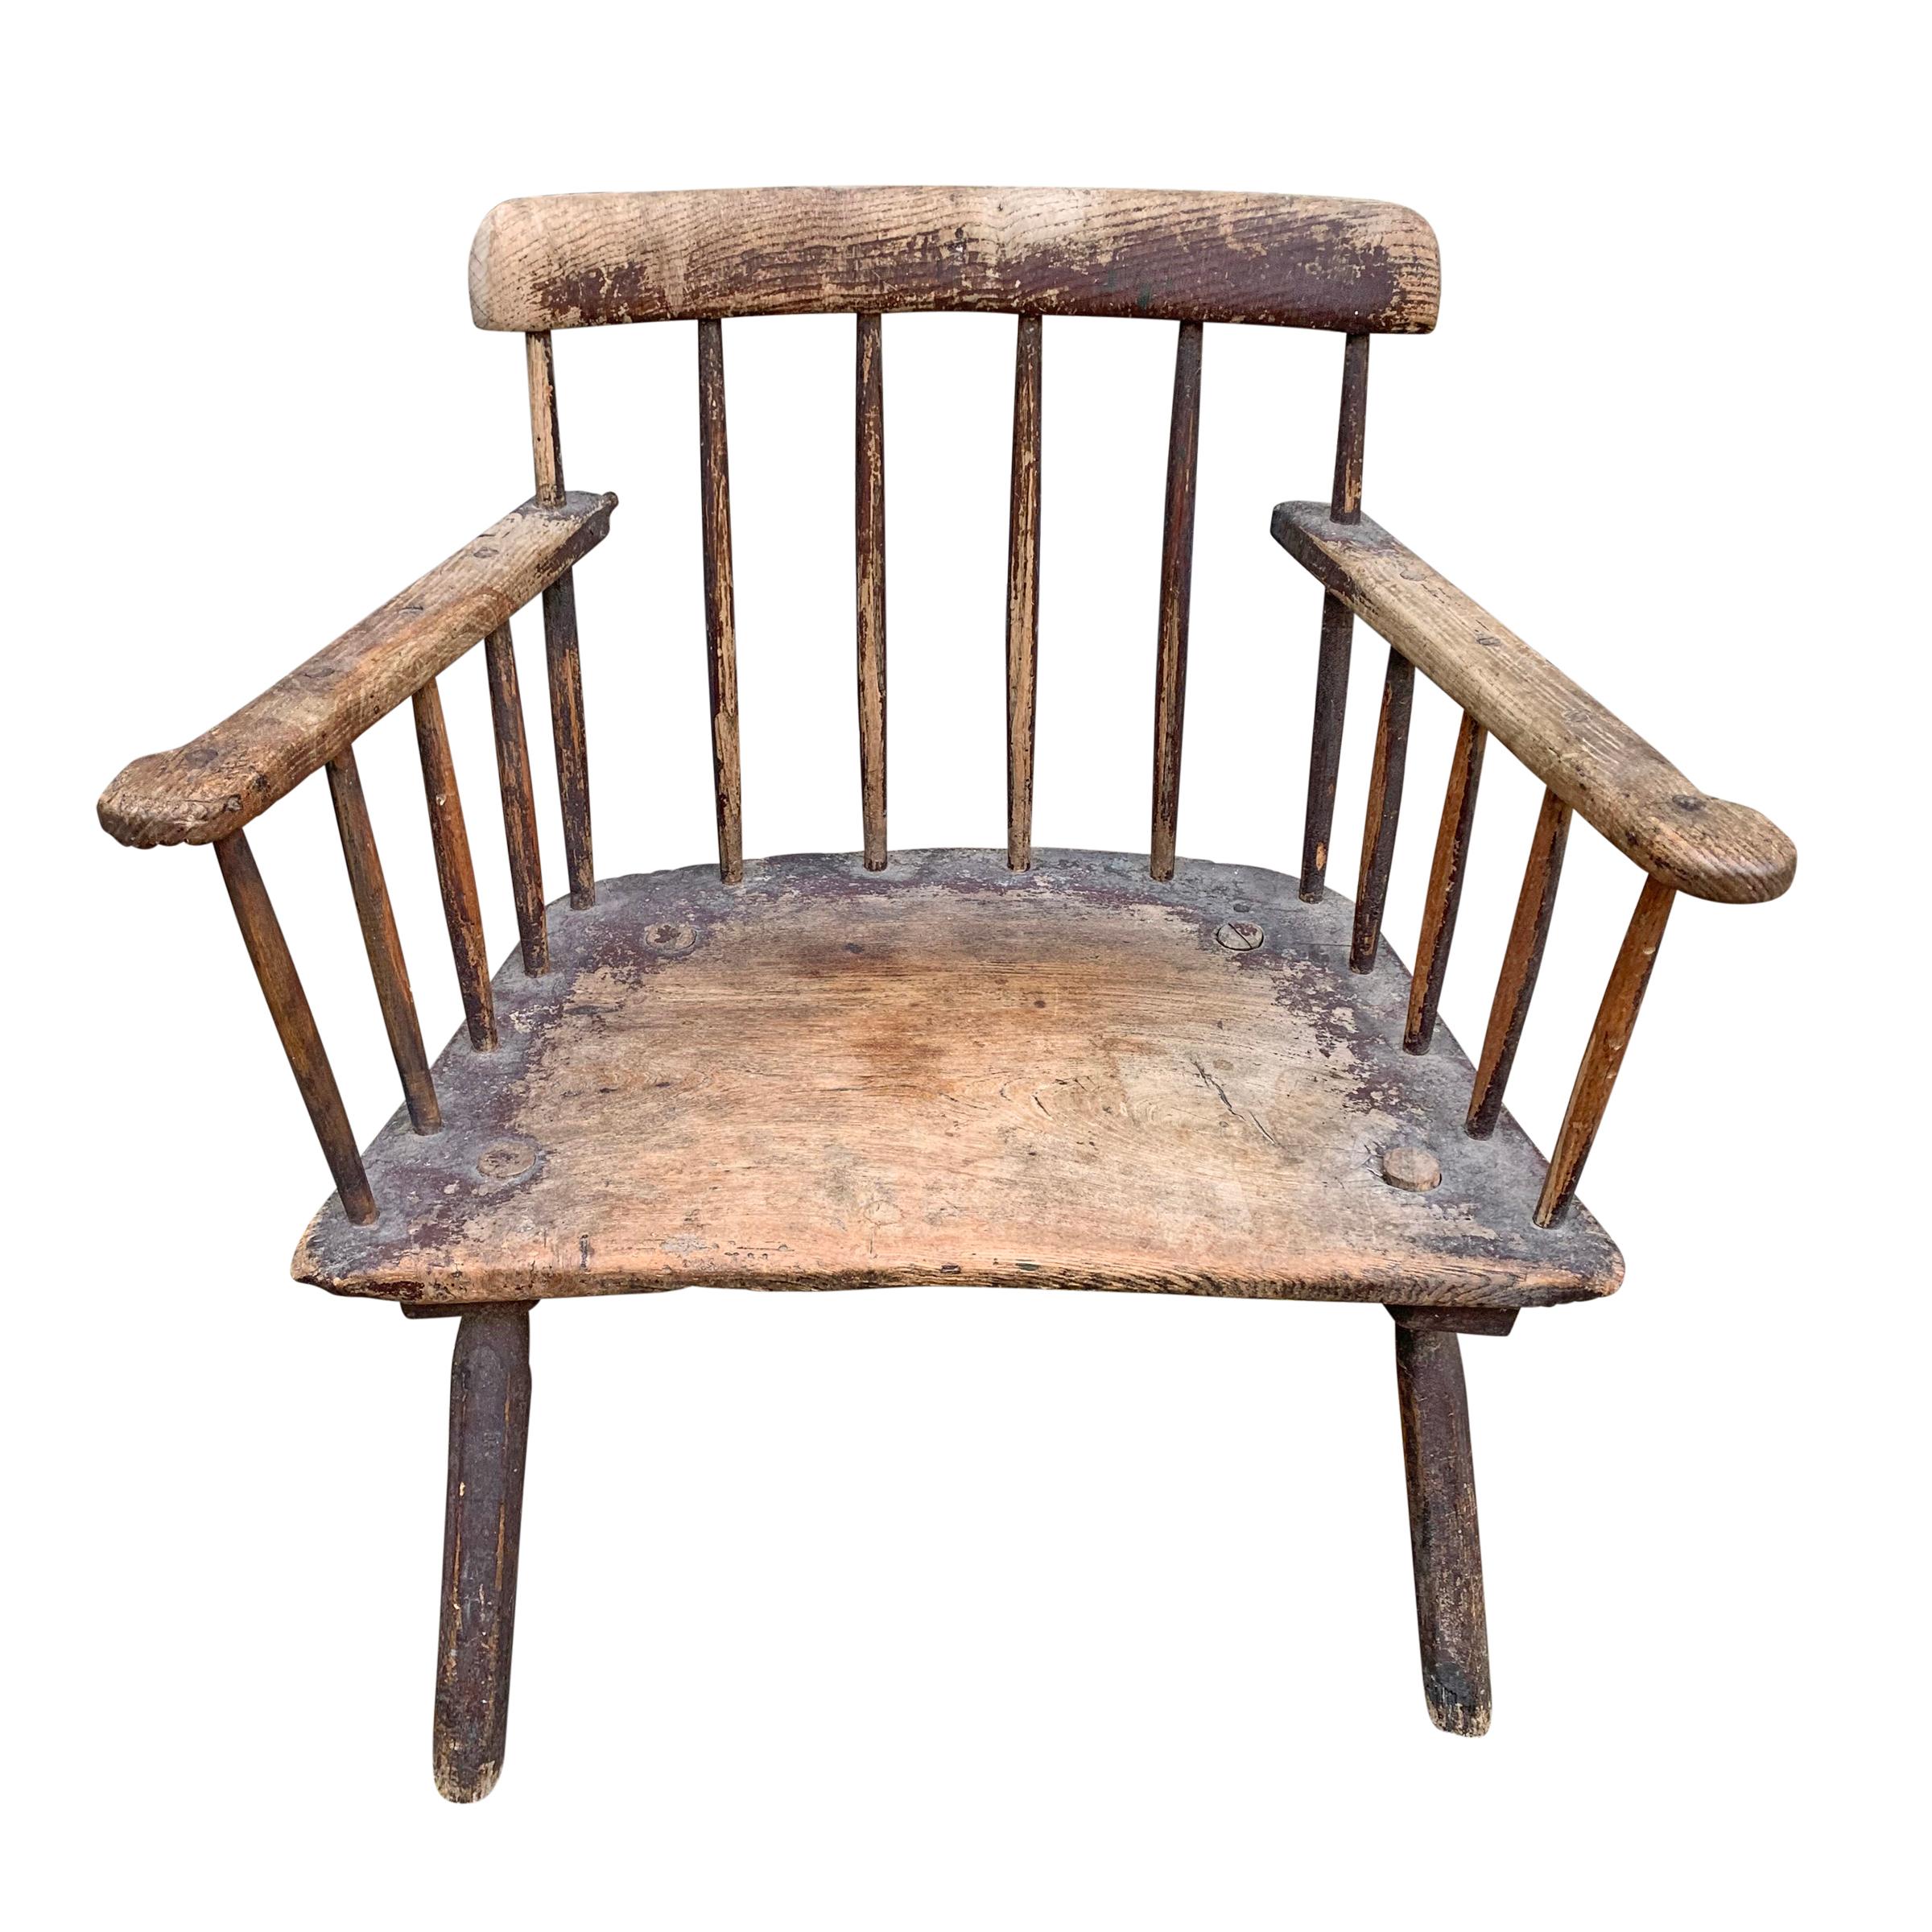 A stunning 18th century Welsh vernacular comb-back Windsor chair of simple design with well-worn out-turned arms, a solid plank seat with through pegged legs, and traces of the original painted finish. Chairs of this style were designed to be placed